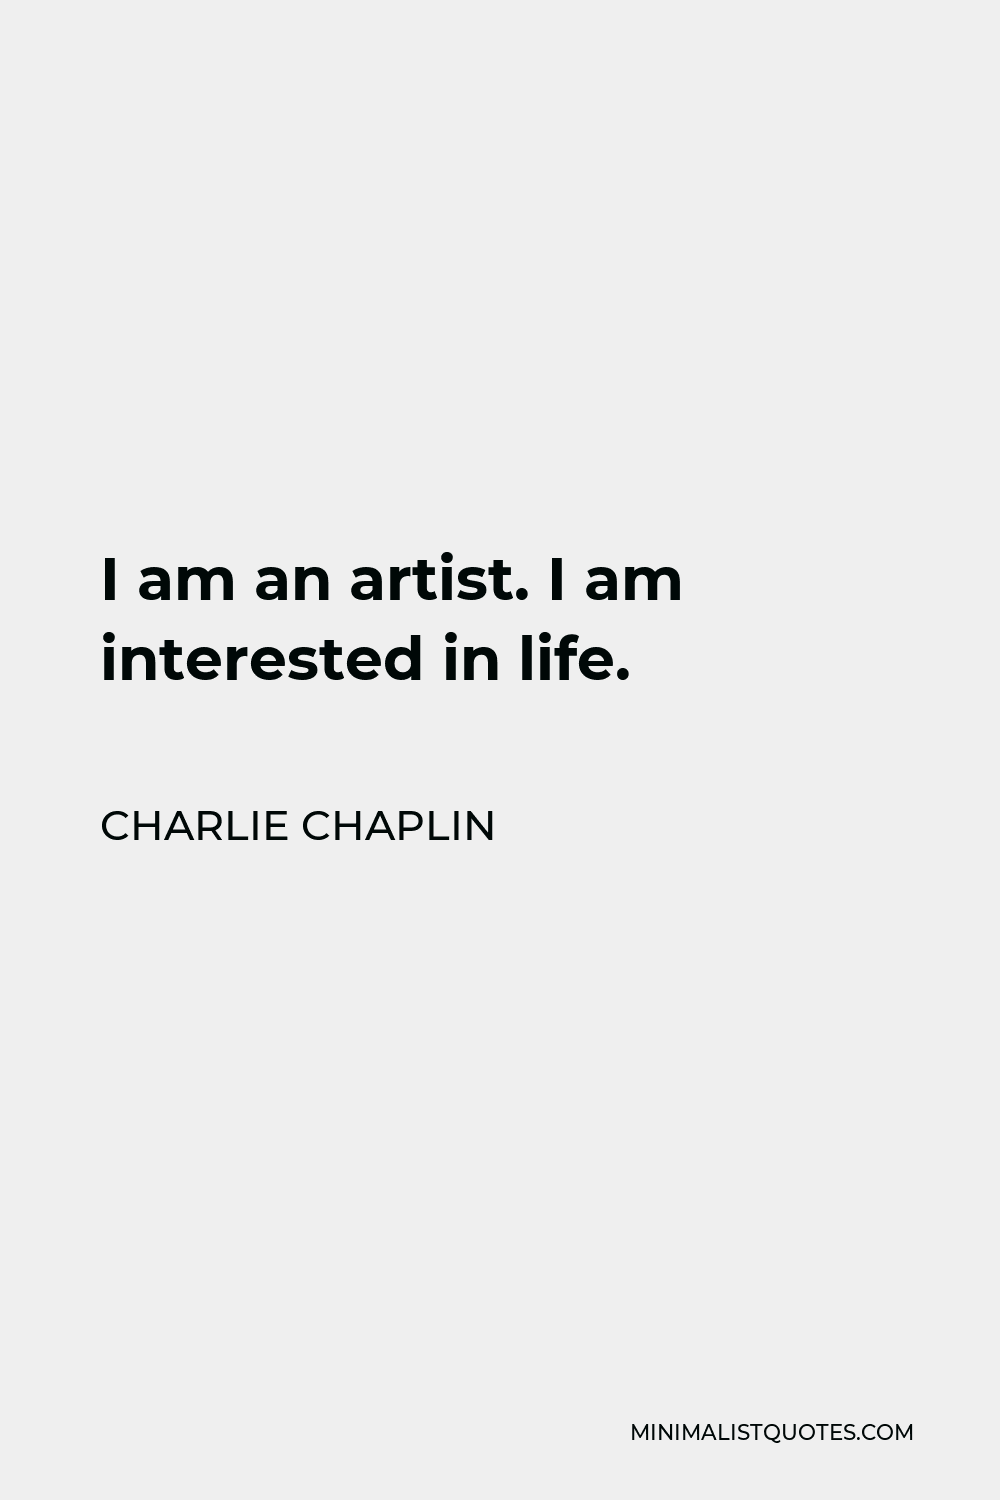 Charlie Chaplin Quote - I am an artist. I am interested in life.